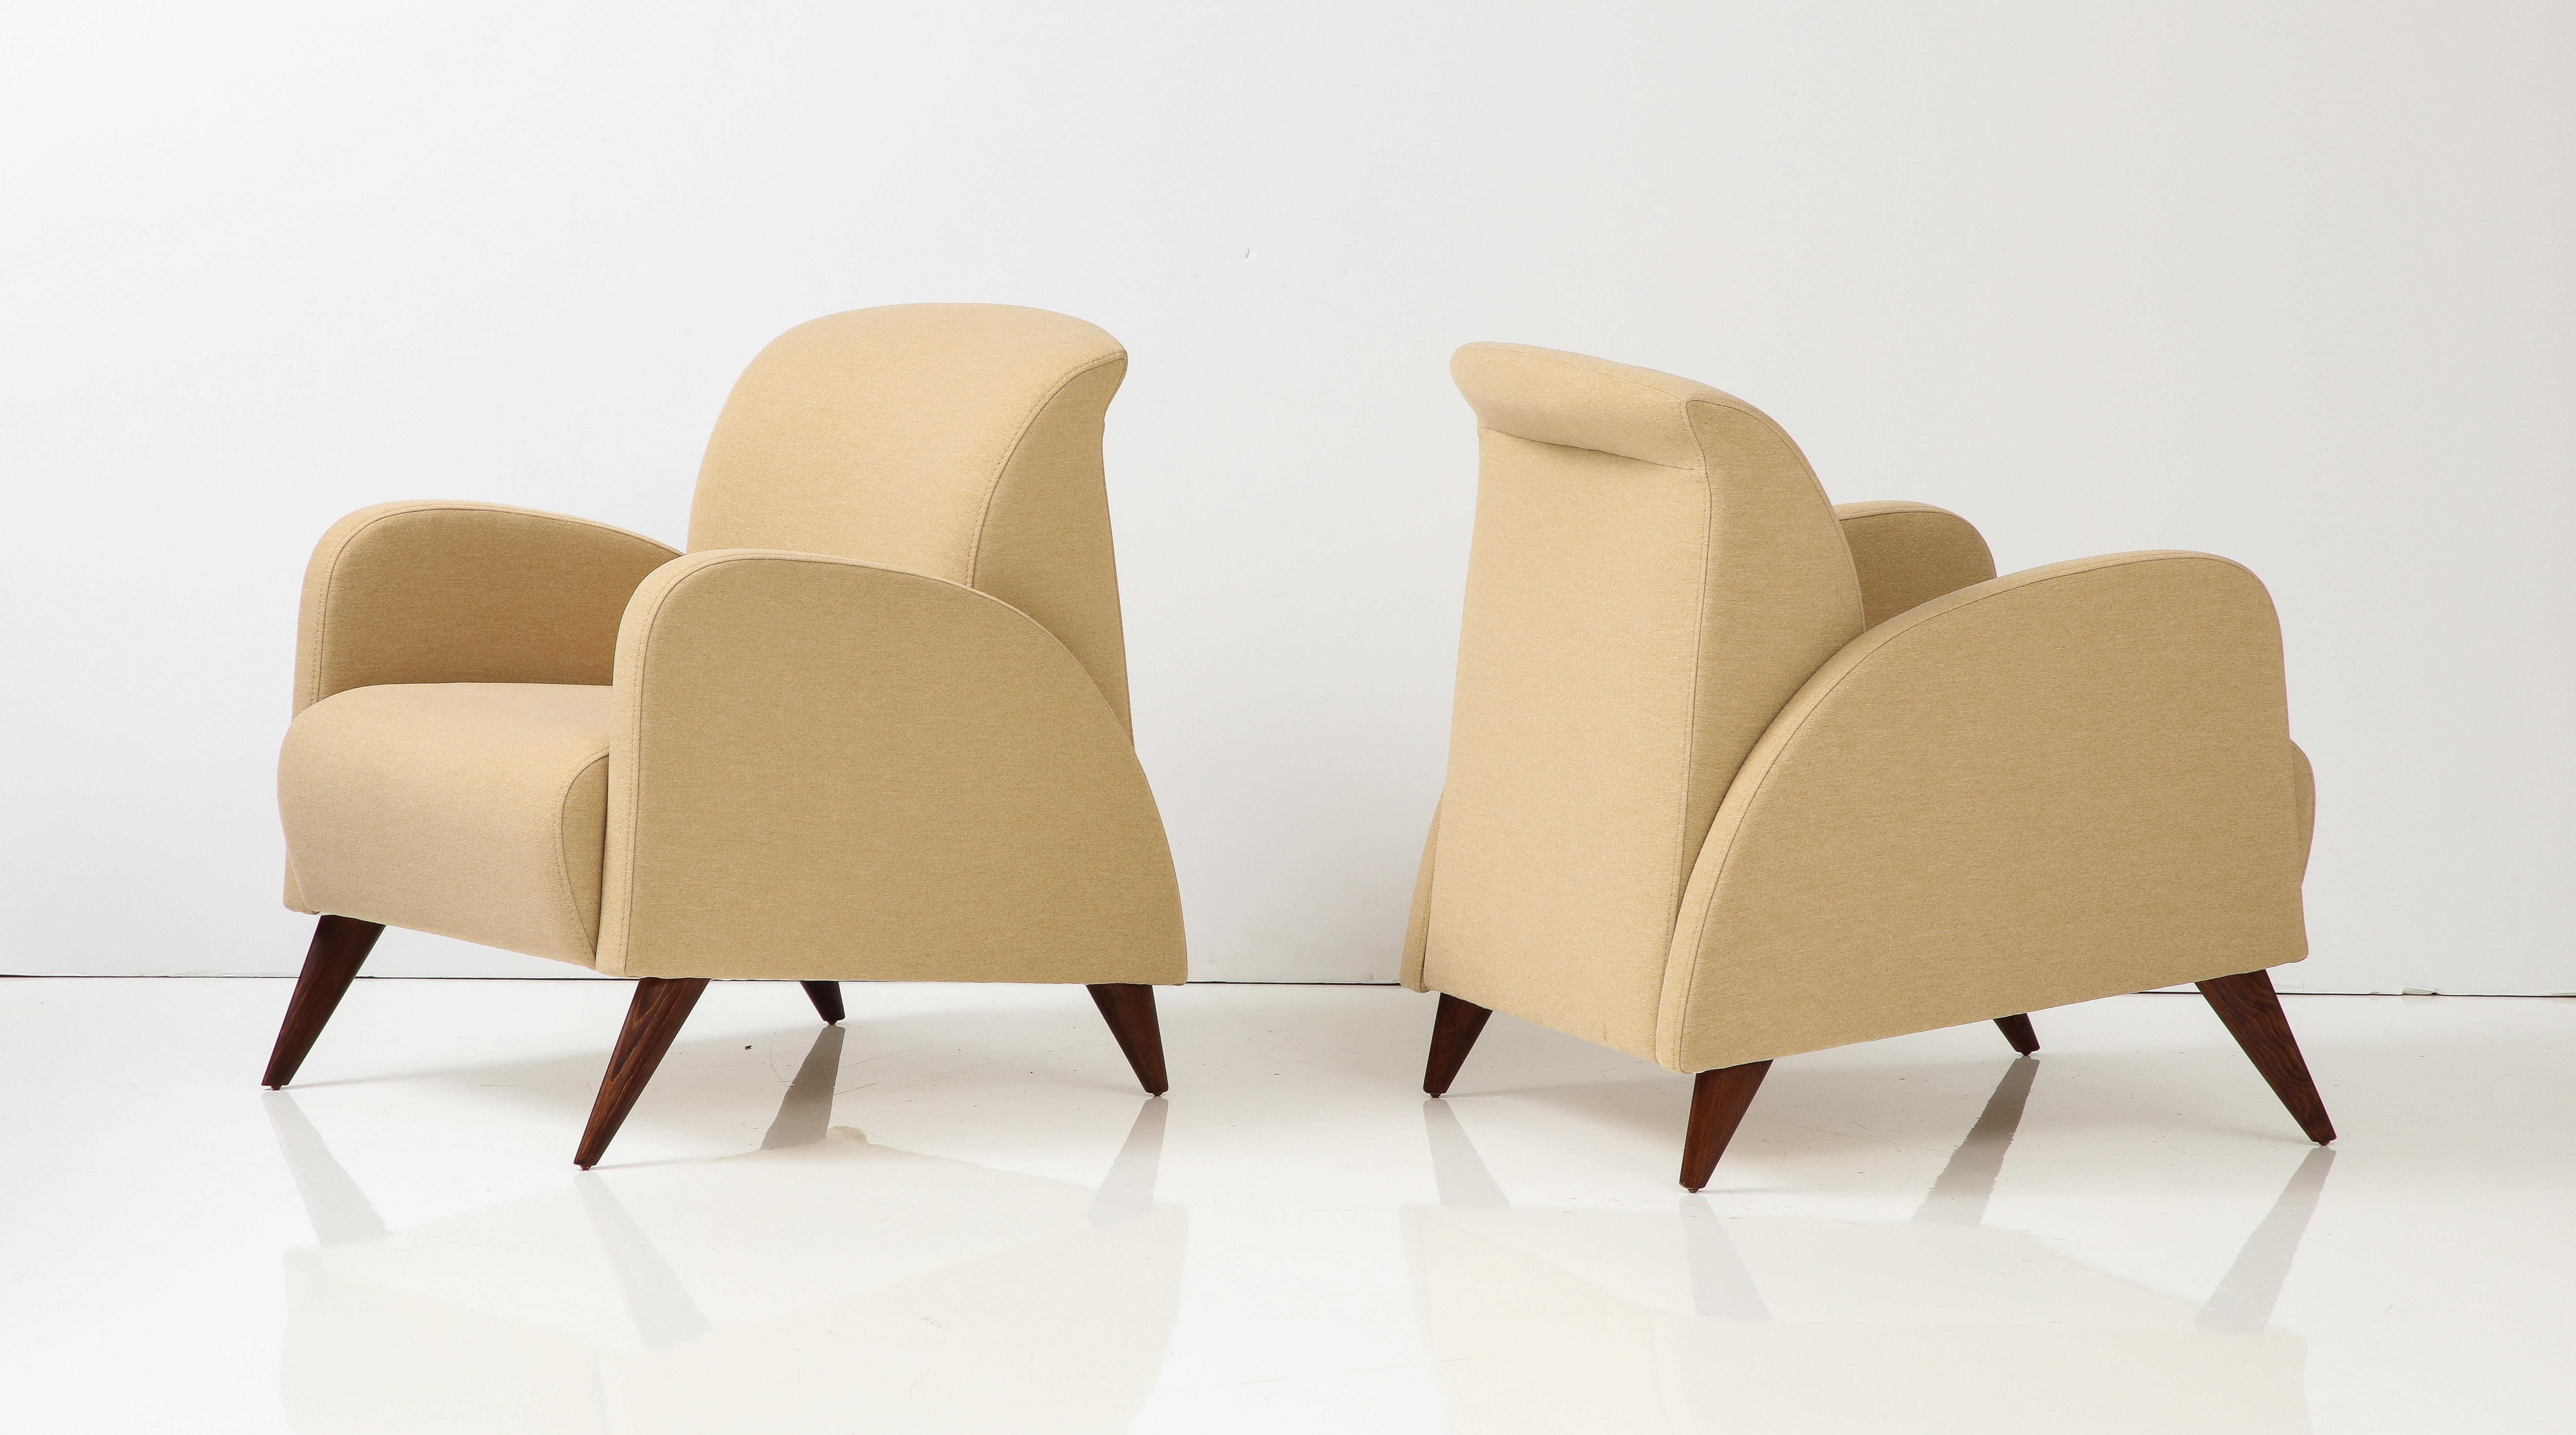 Pair of Italian Art Deco Lounge Chairs, circa 1940 For Sale 1